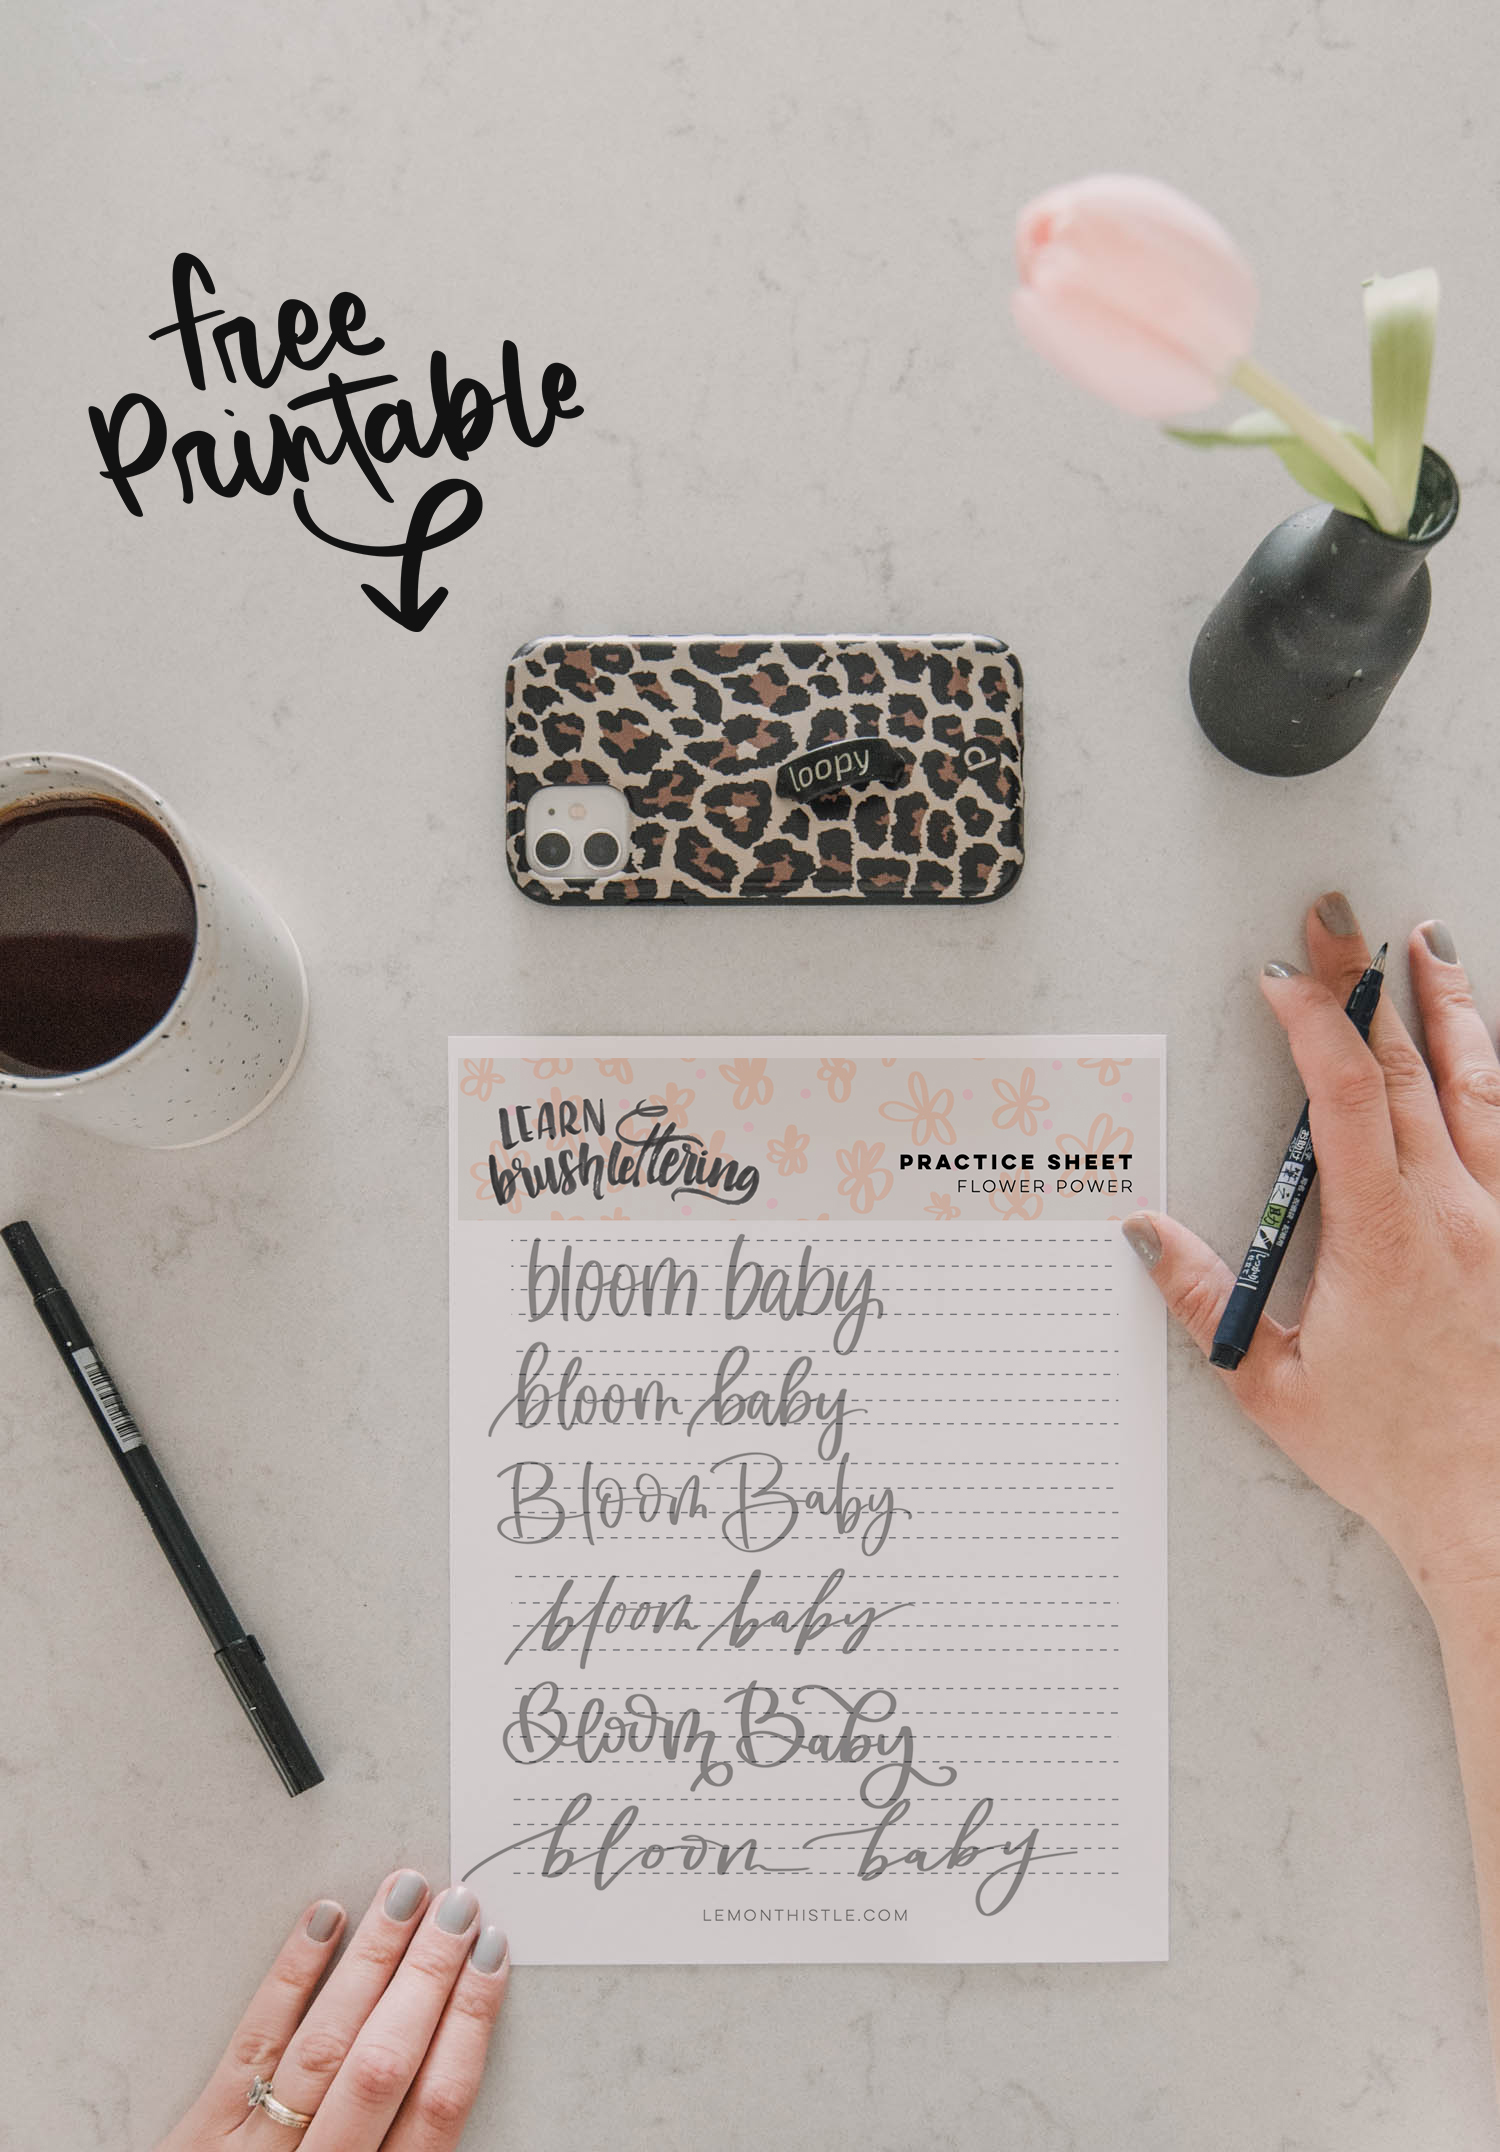 Fun printable to practice 6 different styles of hand lettering 